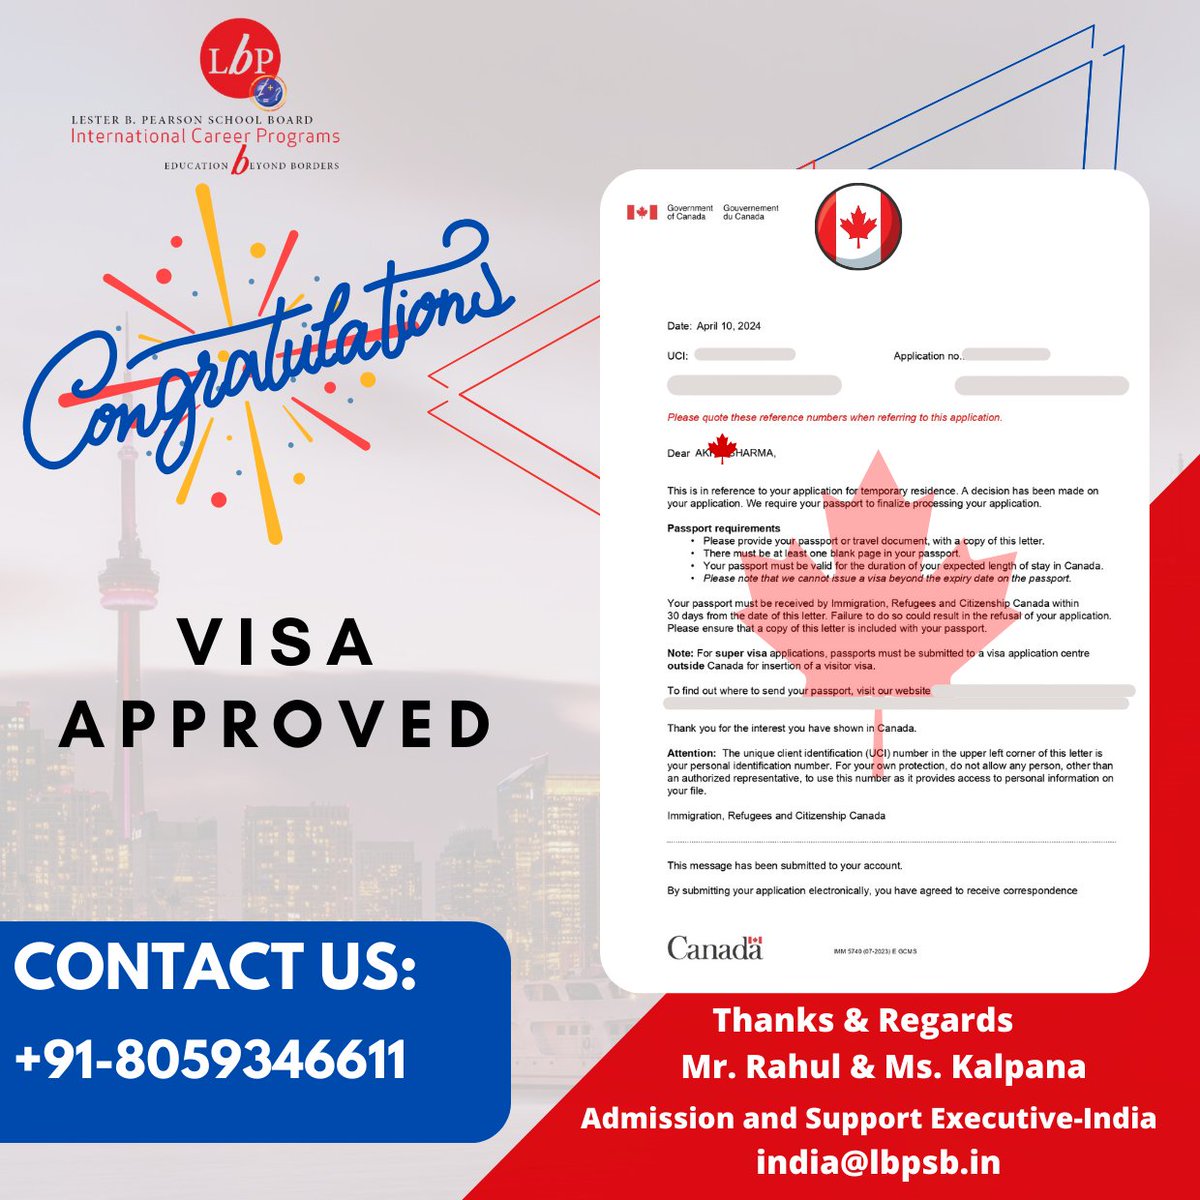 🇨🇦 🇨🇦 Canada Study Visa Approval 🇨🇦 🇨🇦

Mr. Vishal Manocha Congratulates Akhil for getting a Study visa approved 🇨🇦 🇨🇦

.
#networthimmigrationsolutions #workpermit #bhfyp #foryou #canadalifestyle #studypermit #visitorvisa #canadavisa #canadavisitorvisa #visitorvisacanada